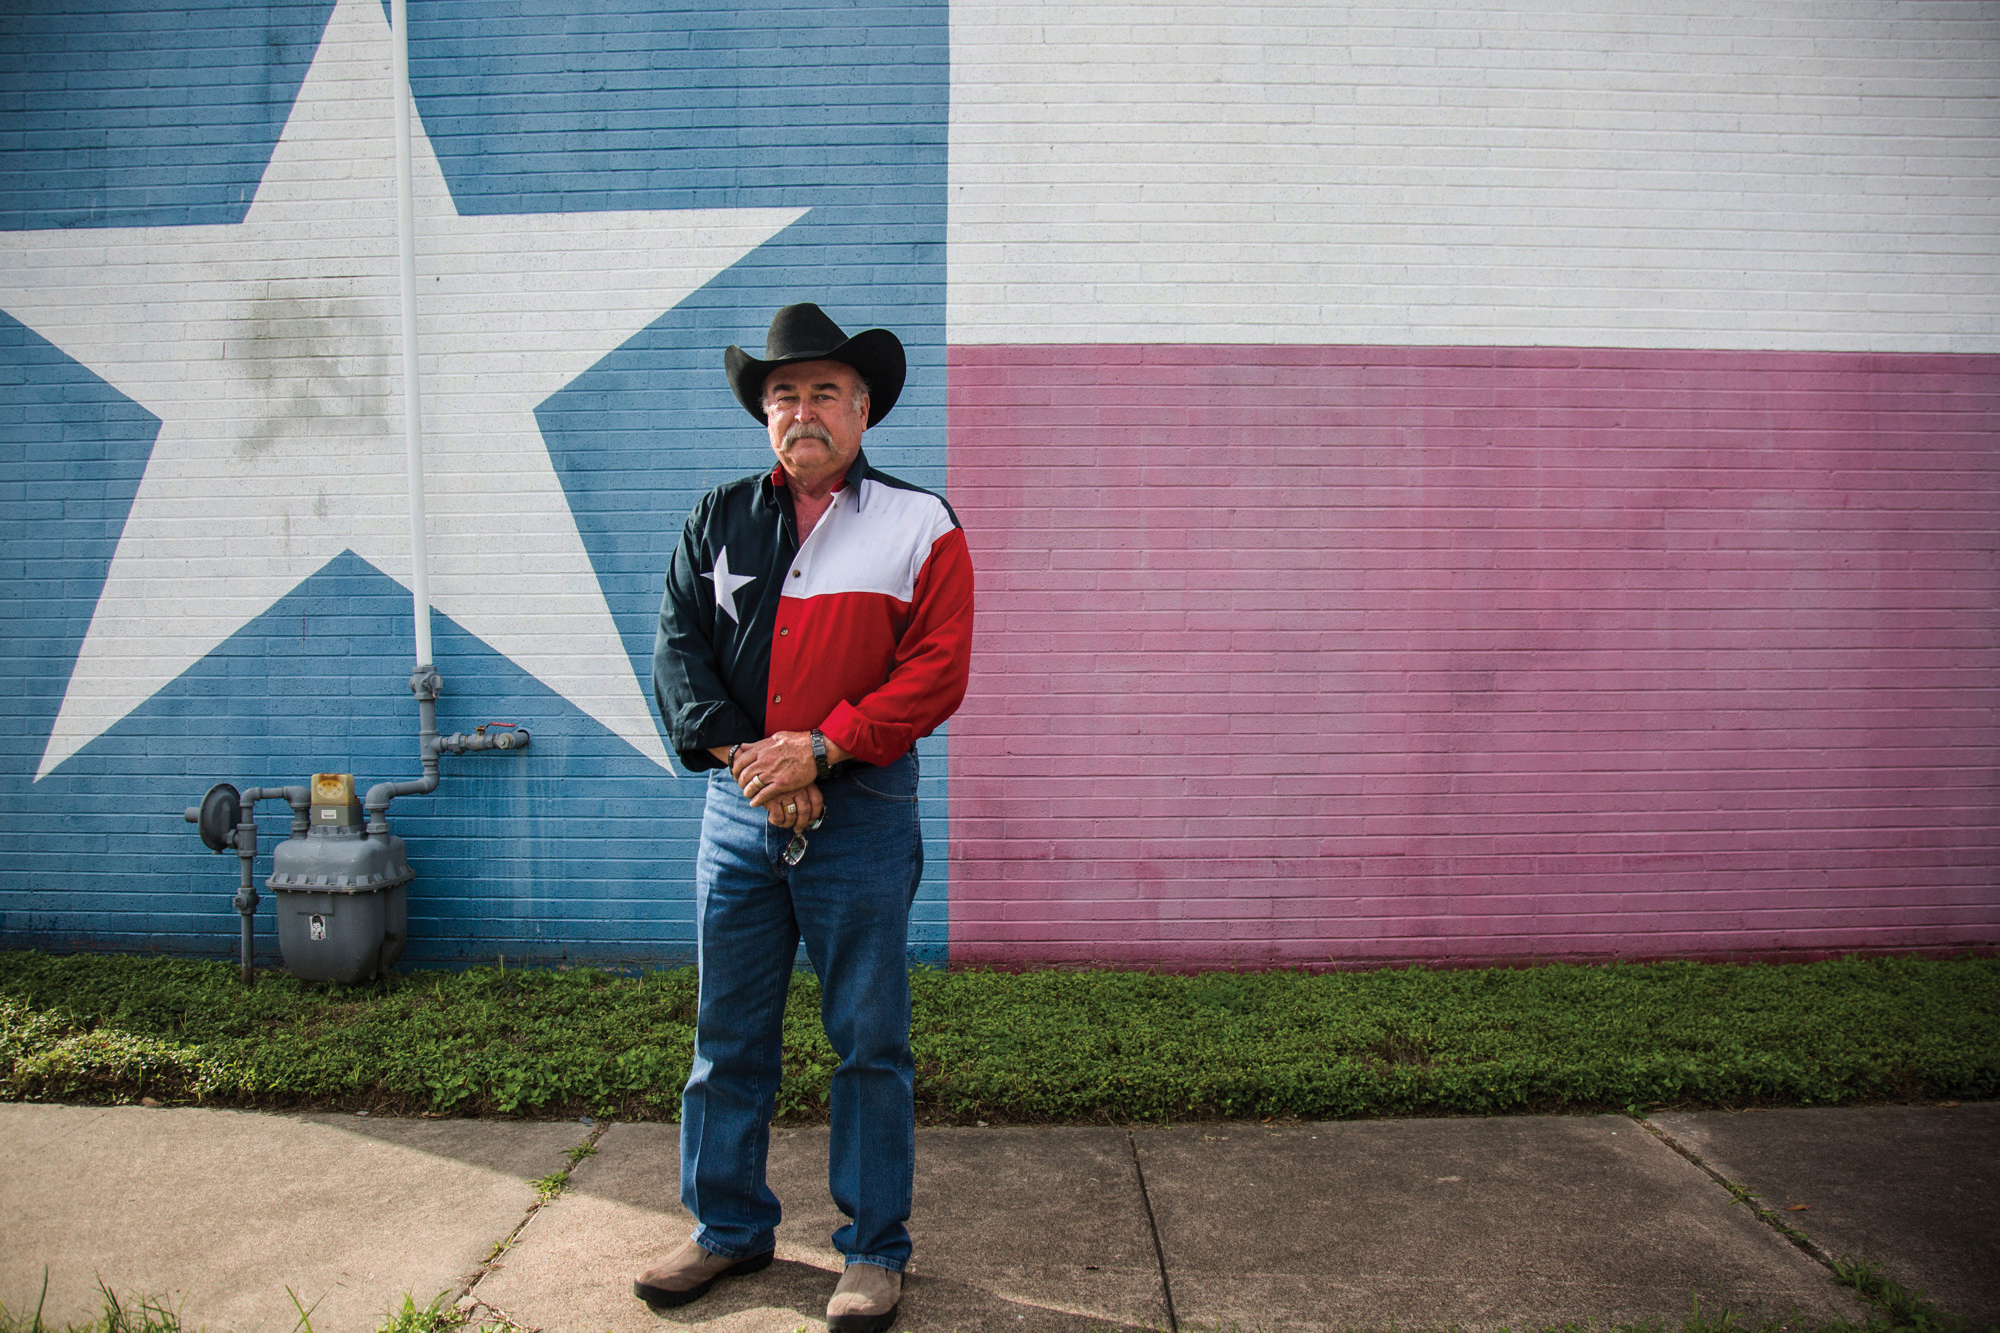  Thomas Smith, 66, stands in front of a Texas flag wall painting with a matching Texas flag shirt before the start of the Veterans Day parade in Victoria, Texas on Nov. 11, 2017. 